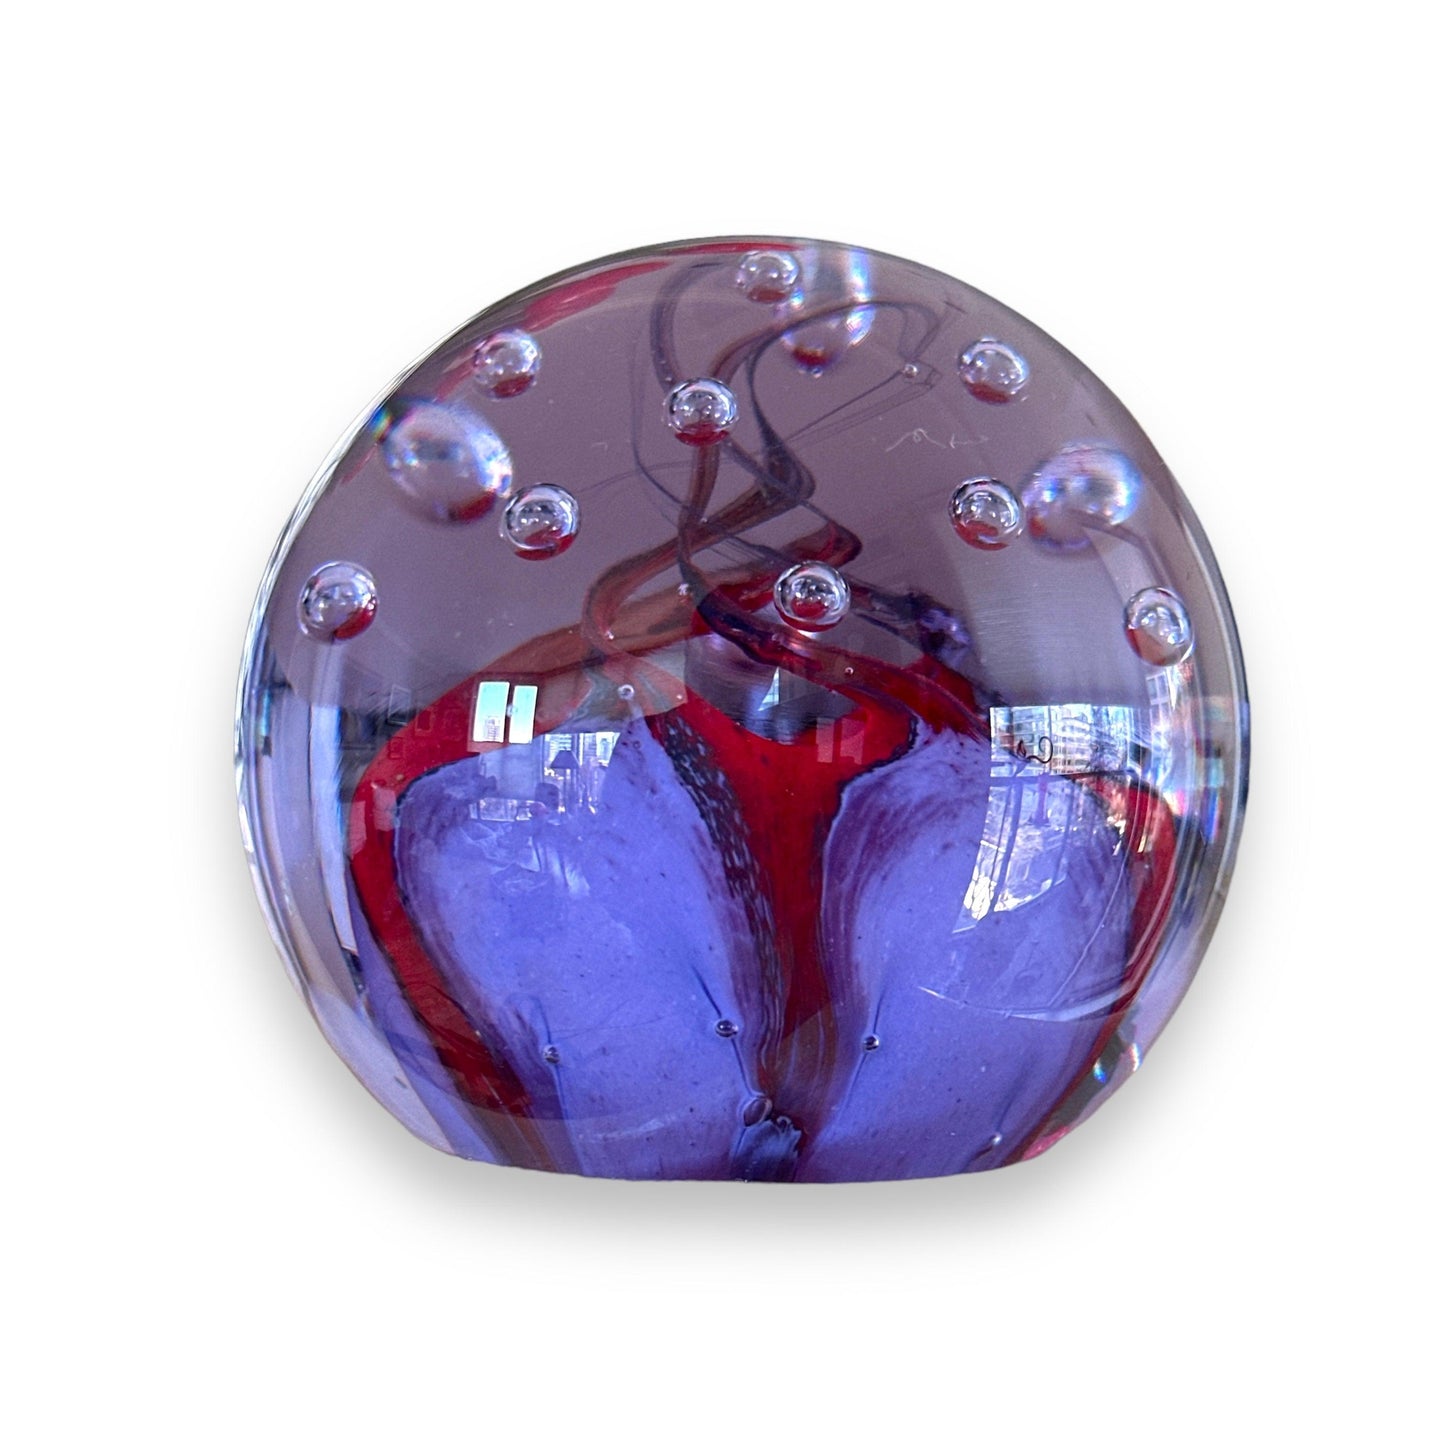 Scottish Glass: Vintage Caithness Paperweight DIABOLO Purple & Red Swirls with Controlled Air Bubbles